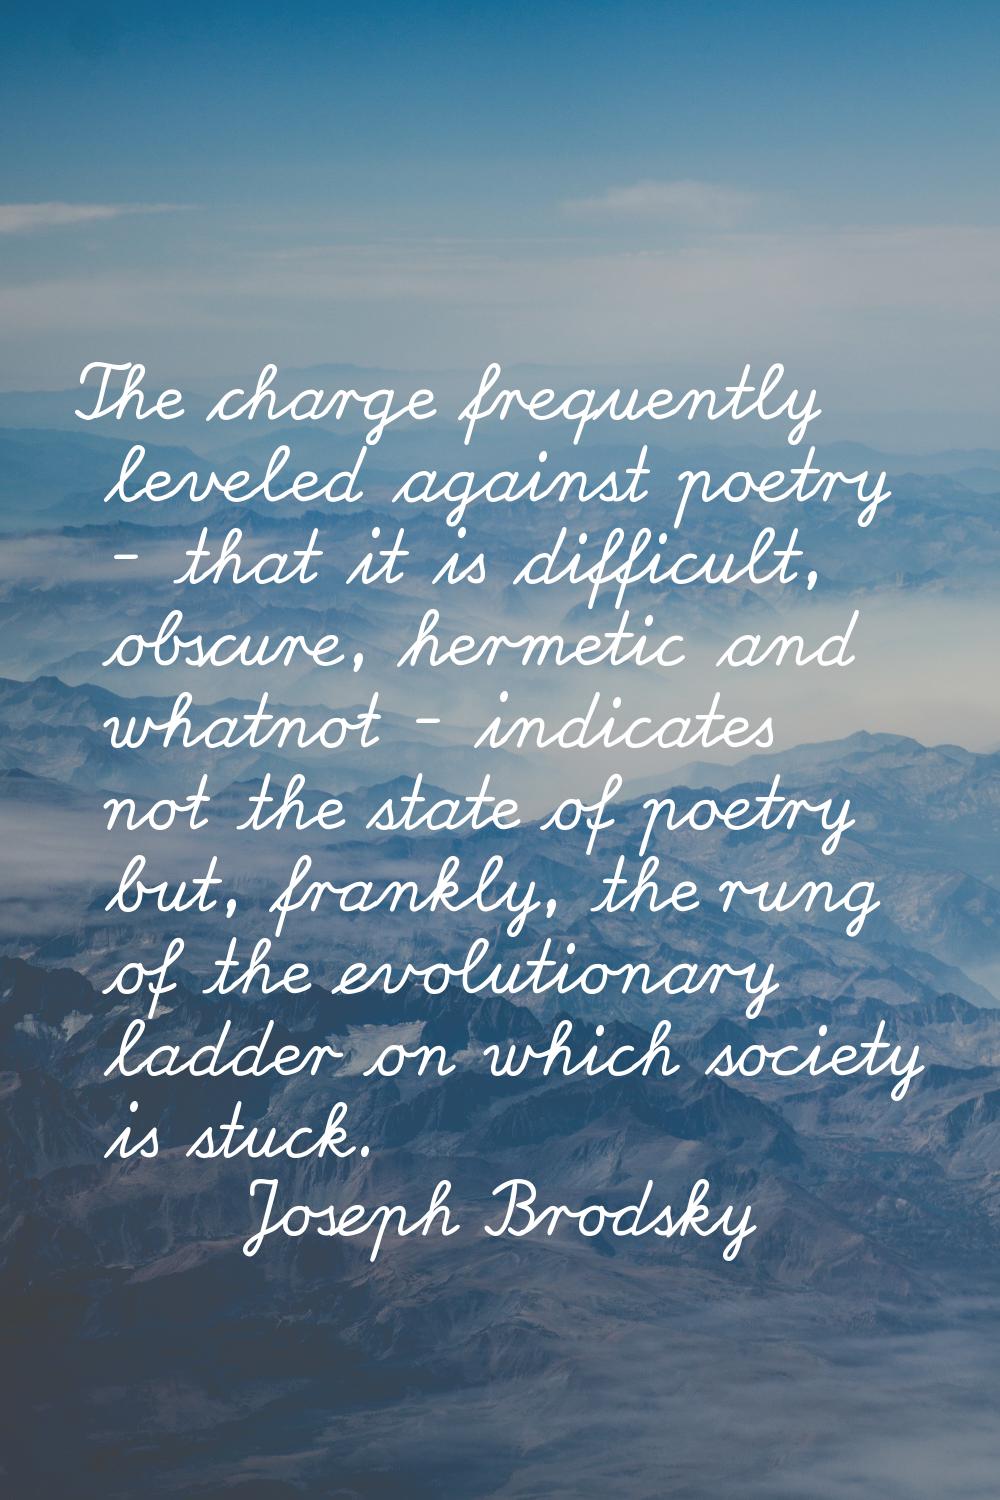 The charge frequently leveled against poetry - that it is difficult, obscure, hermetic and whatnot 